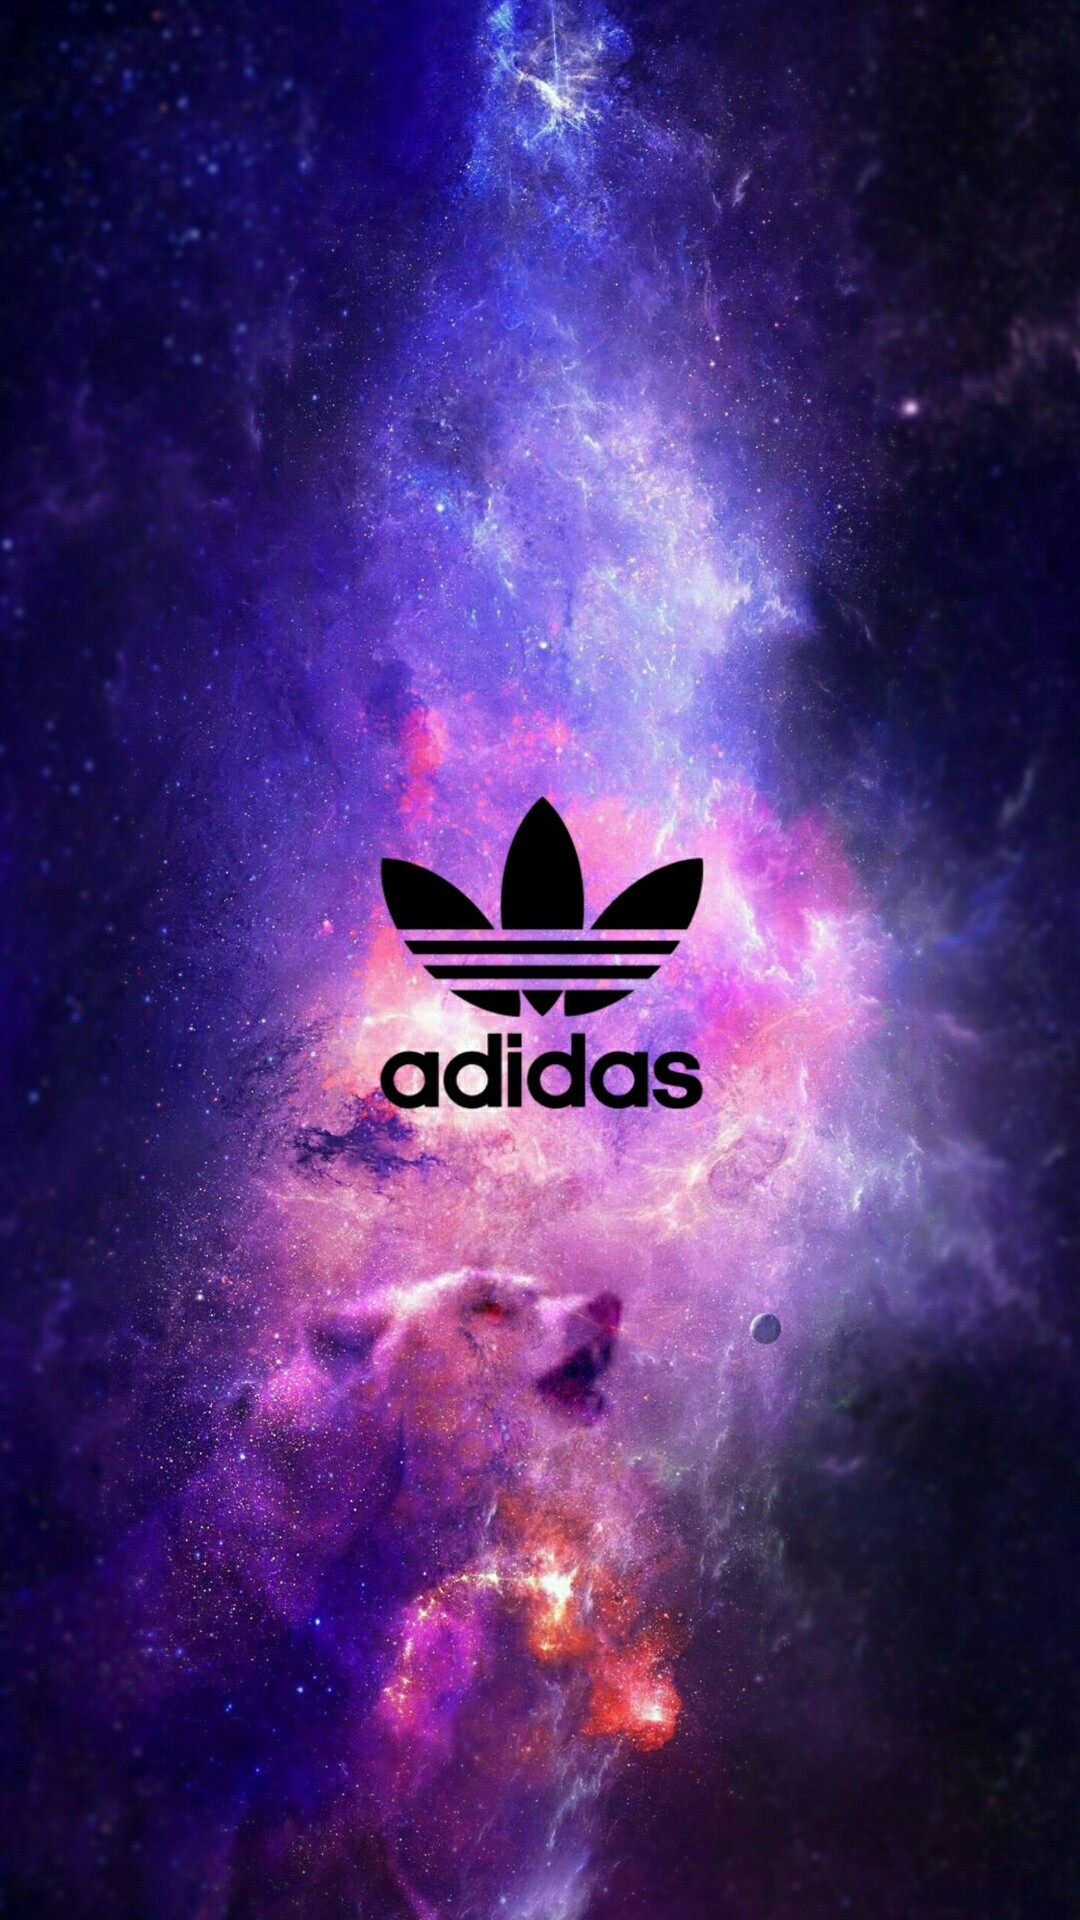 Adidas Dope Galaxy Backgrounds